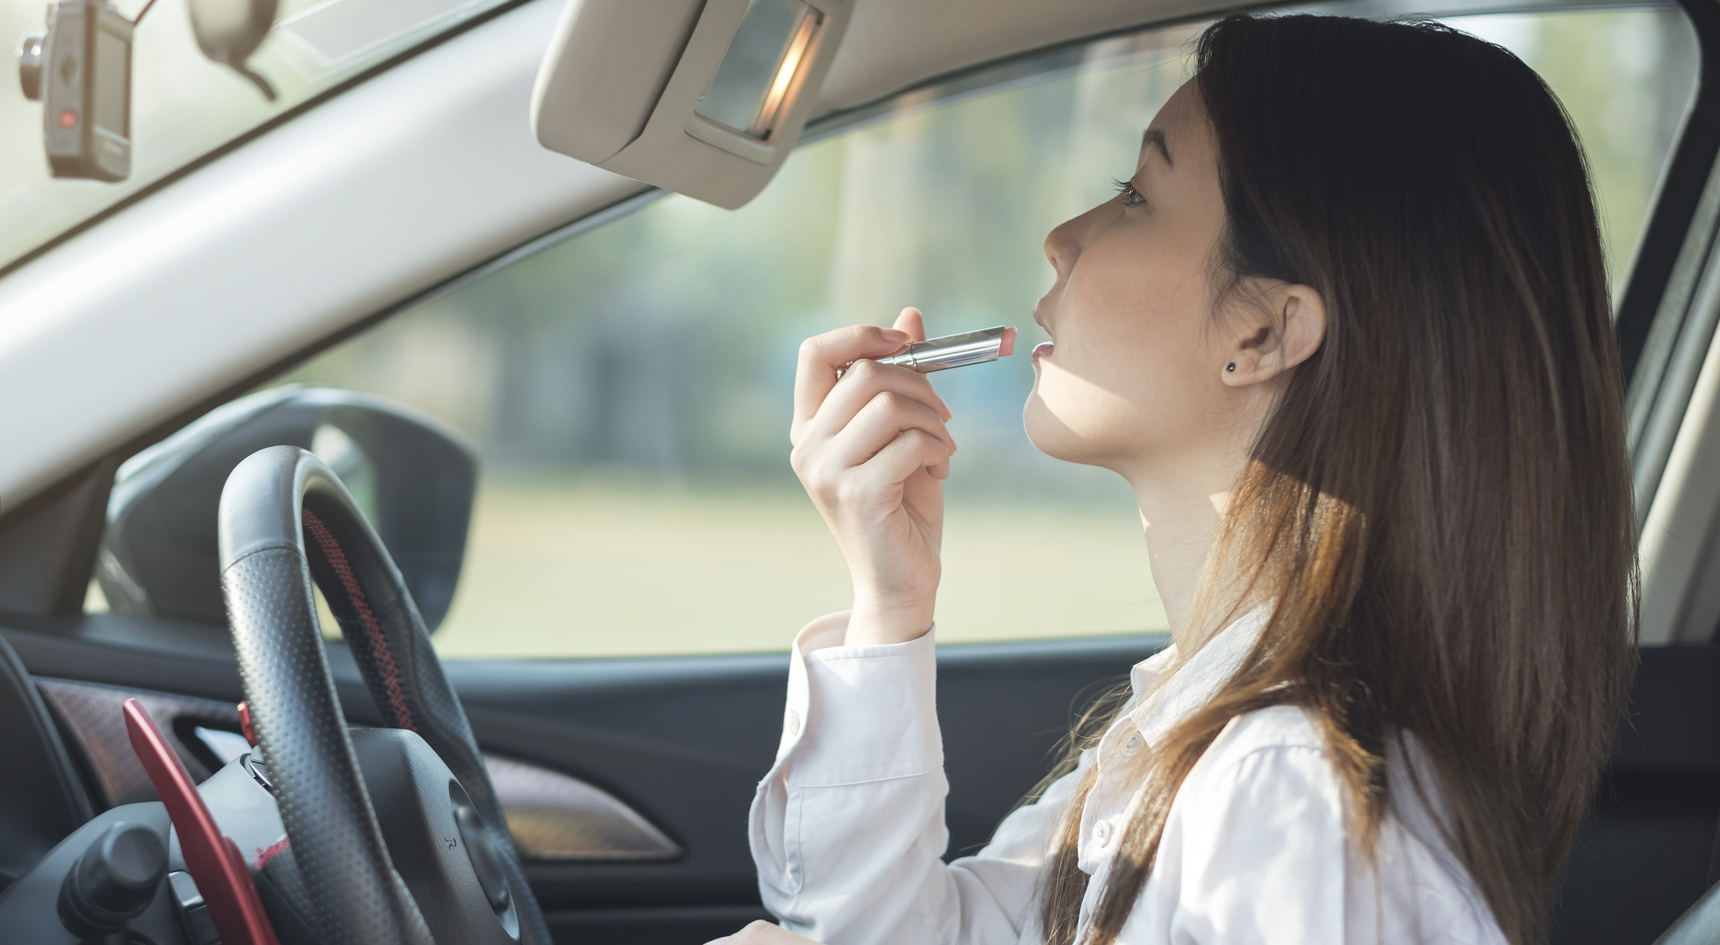 lady applying lipstick while behind the wheel.